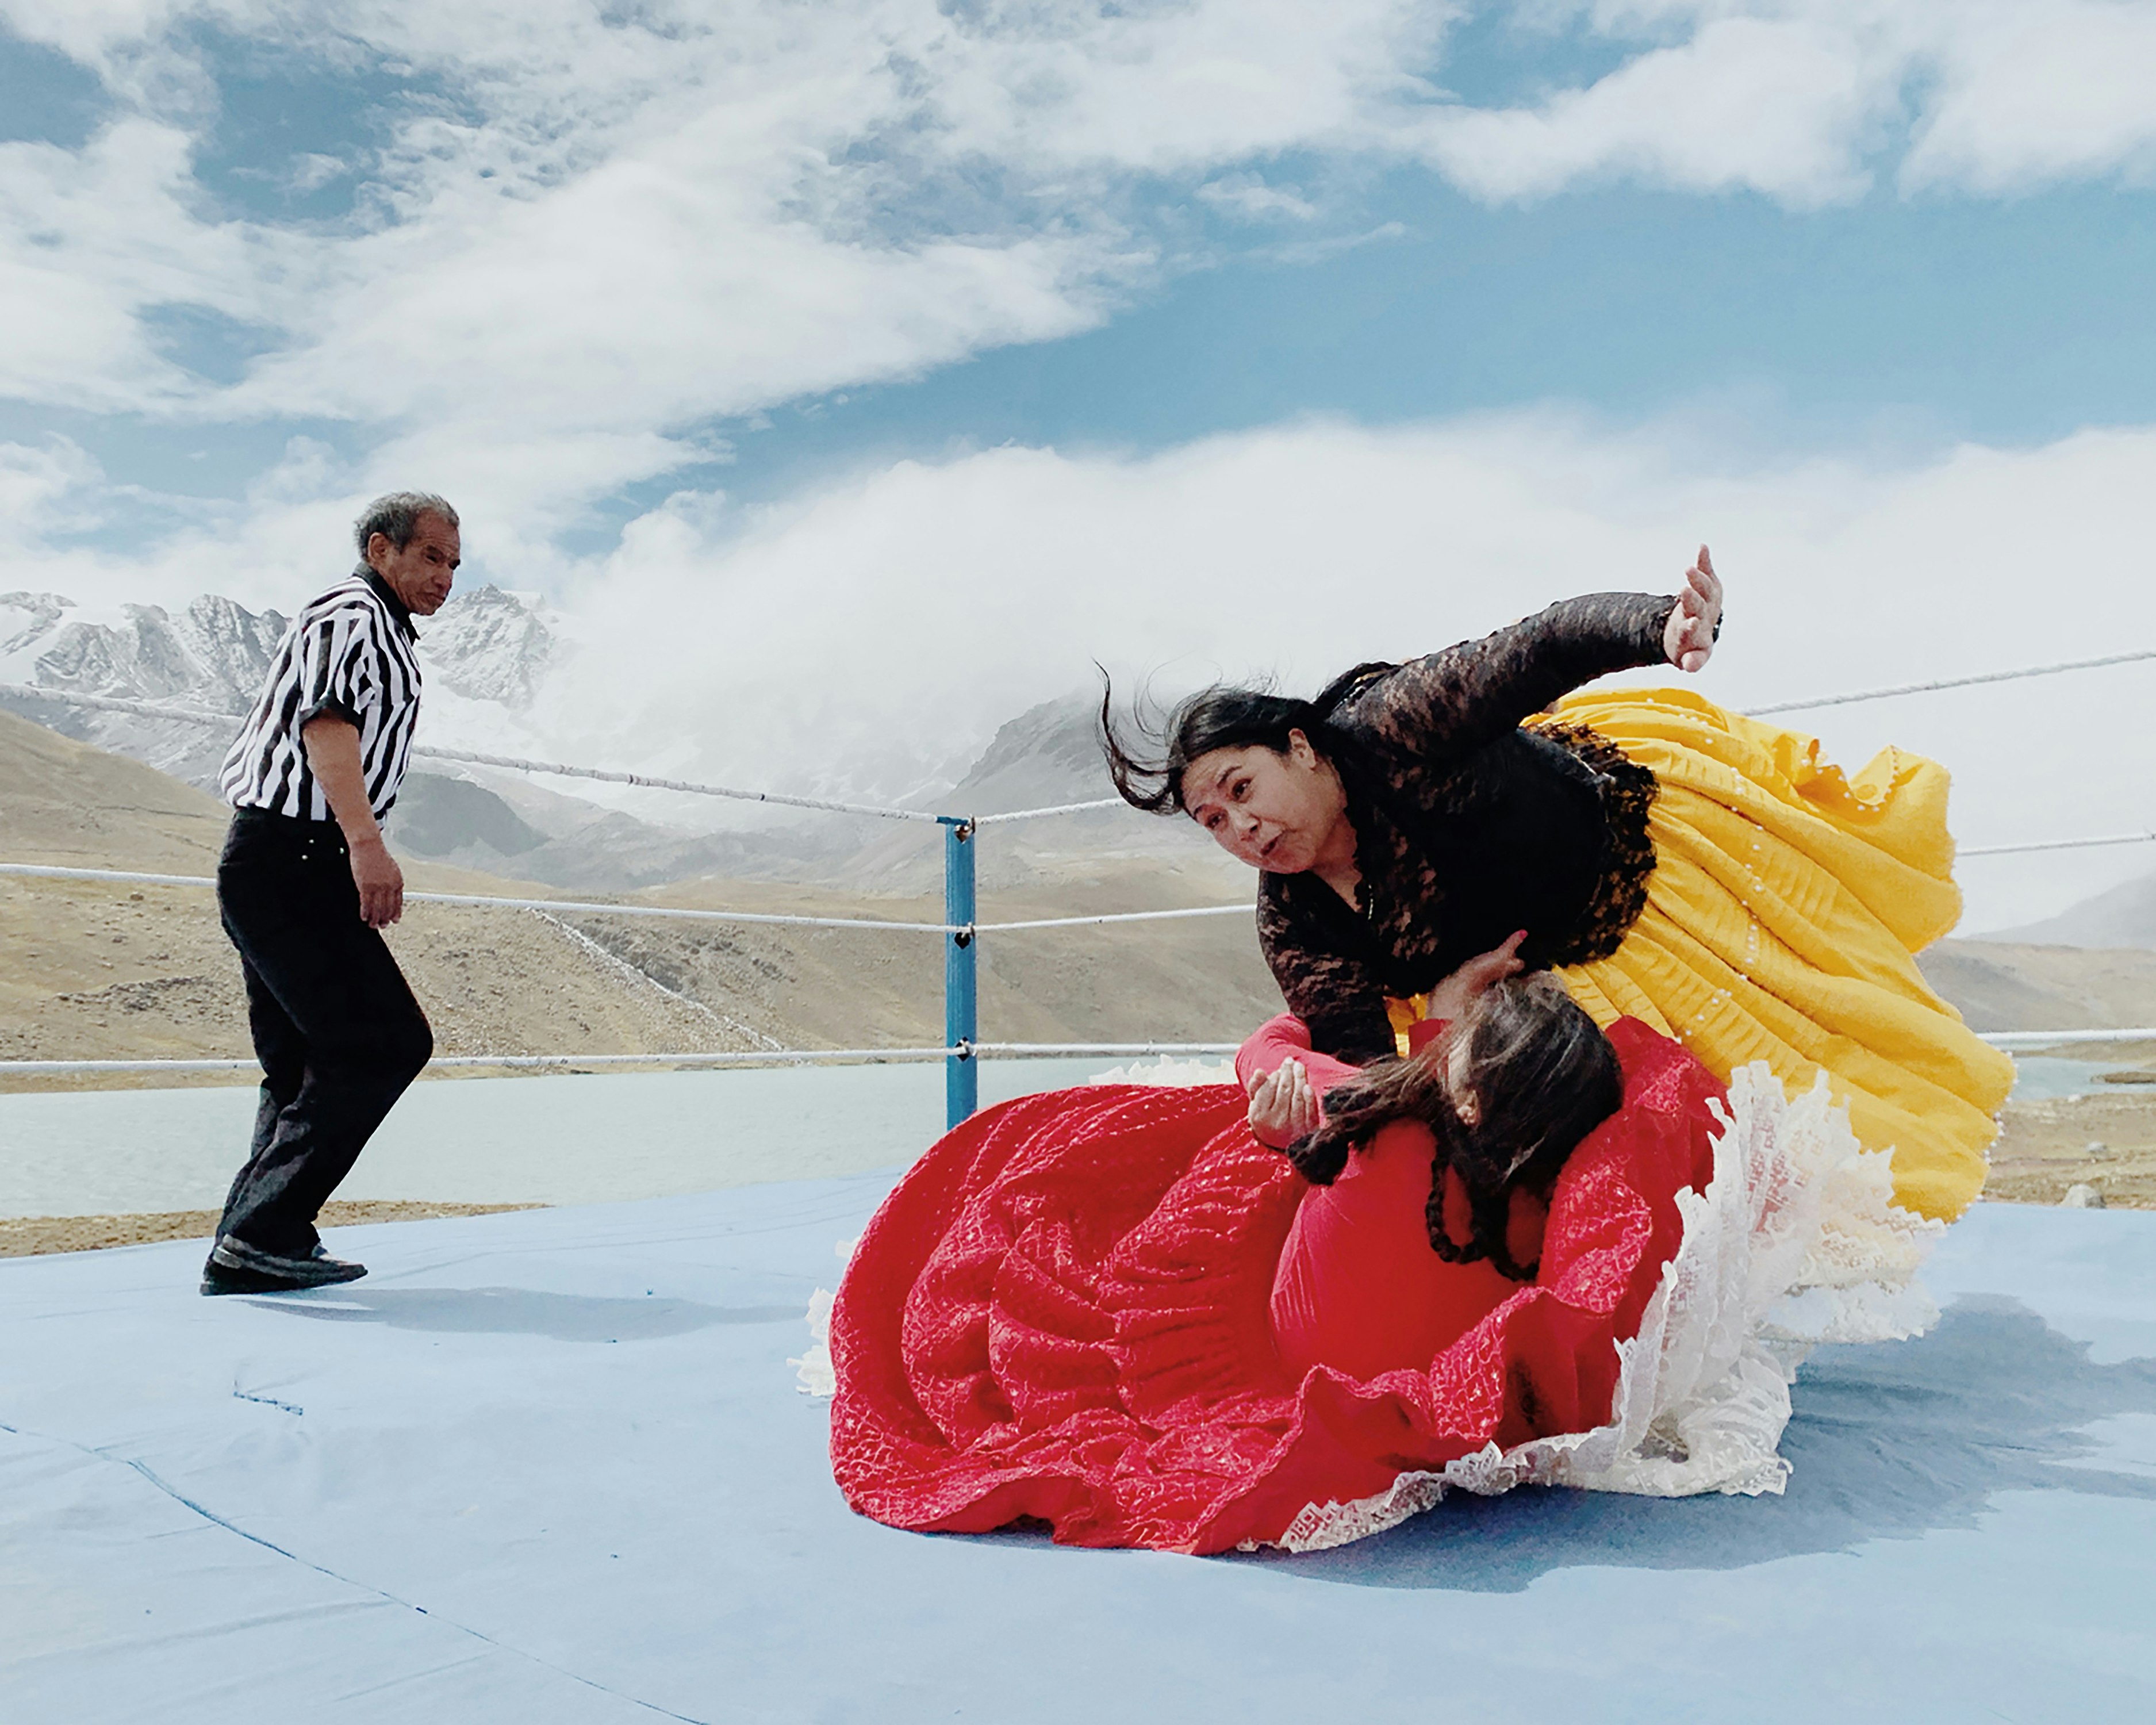 A Bolivian female wrestler performs in the ring while a referee looks on